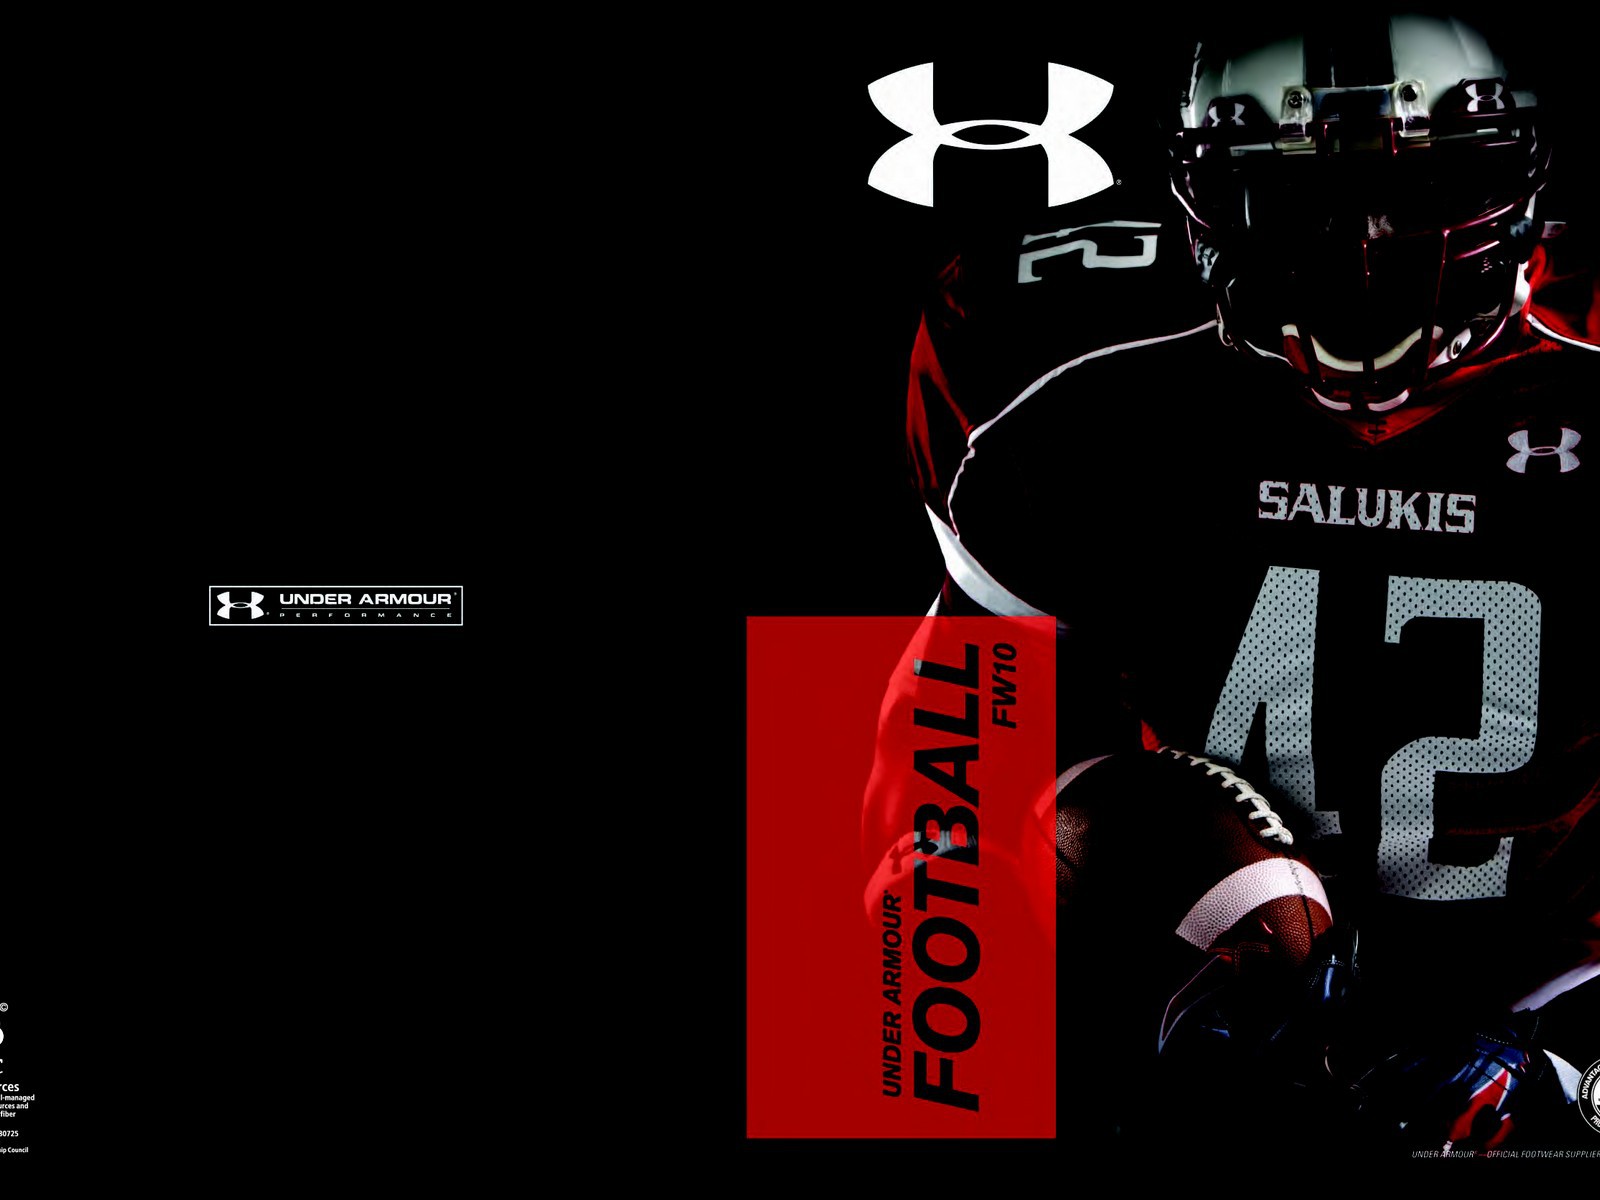 Under Armour Football Wallpaper Hd Images amp Pictures   Becuo